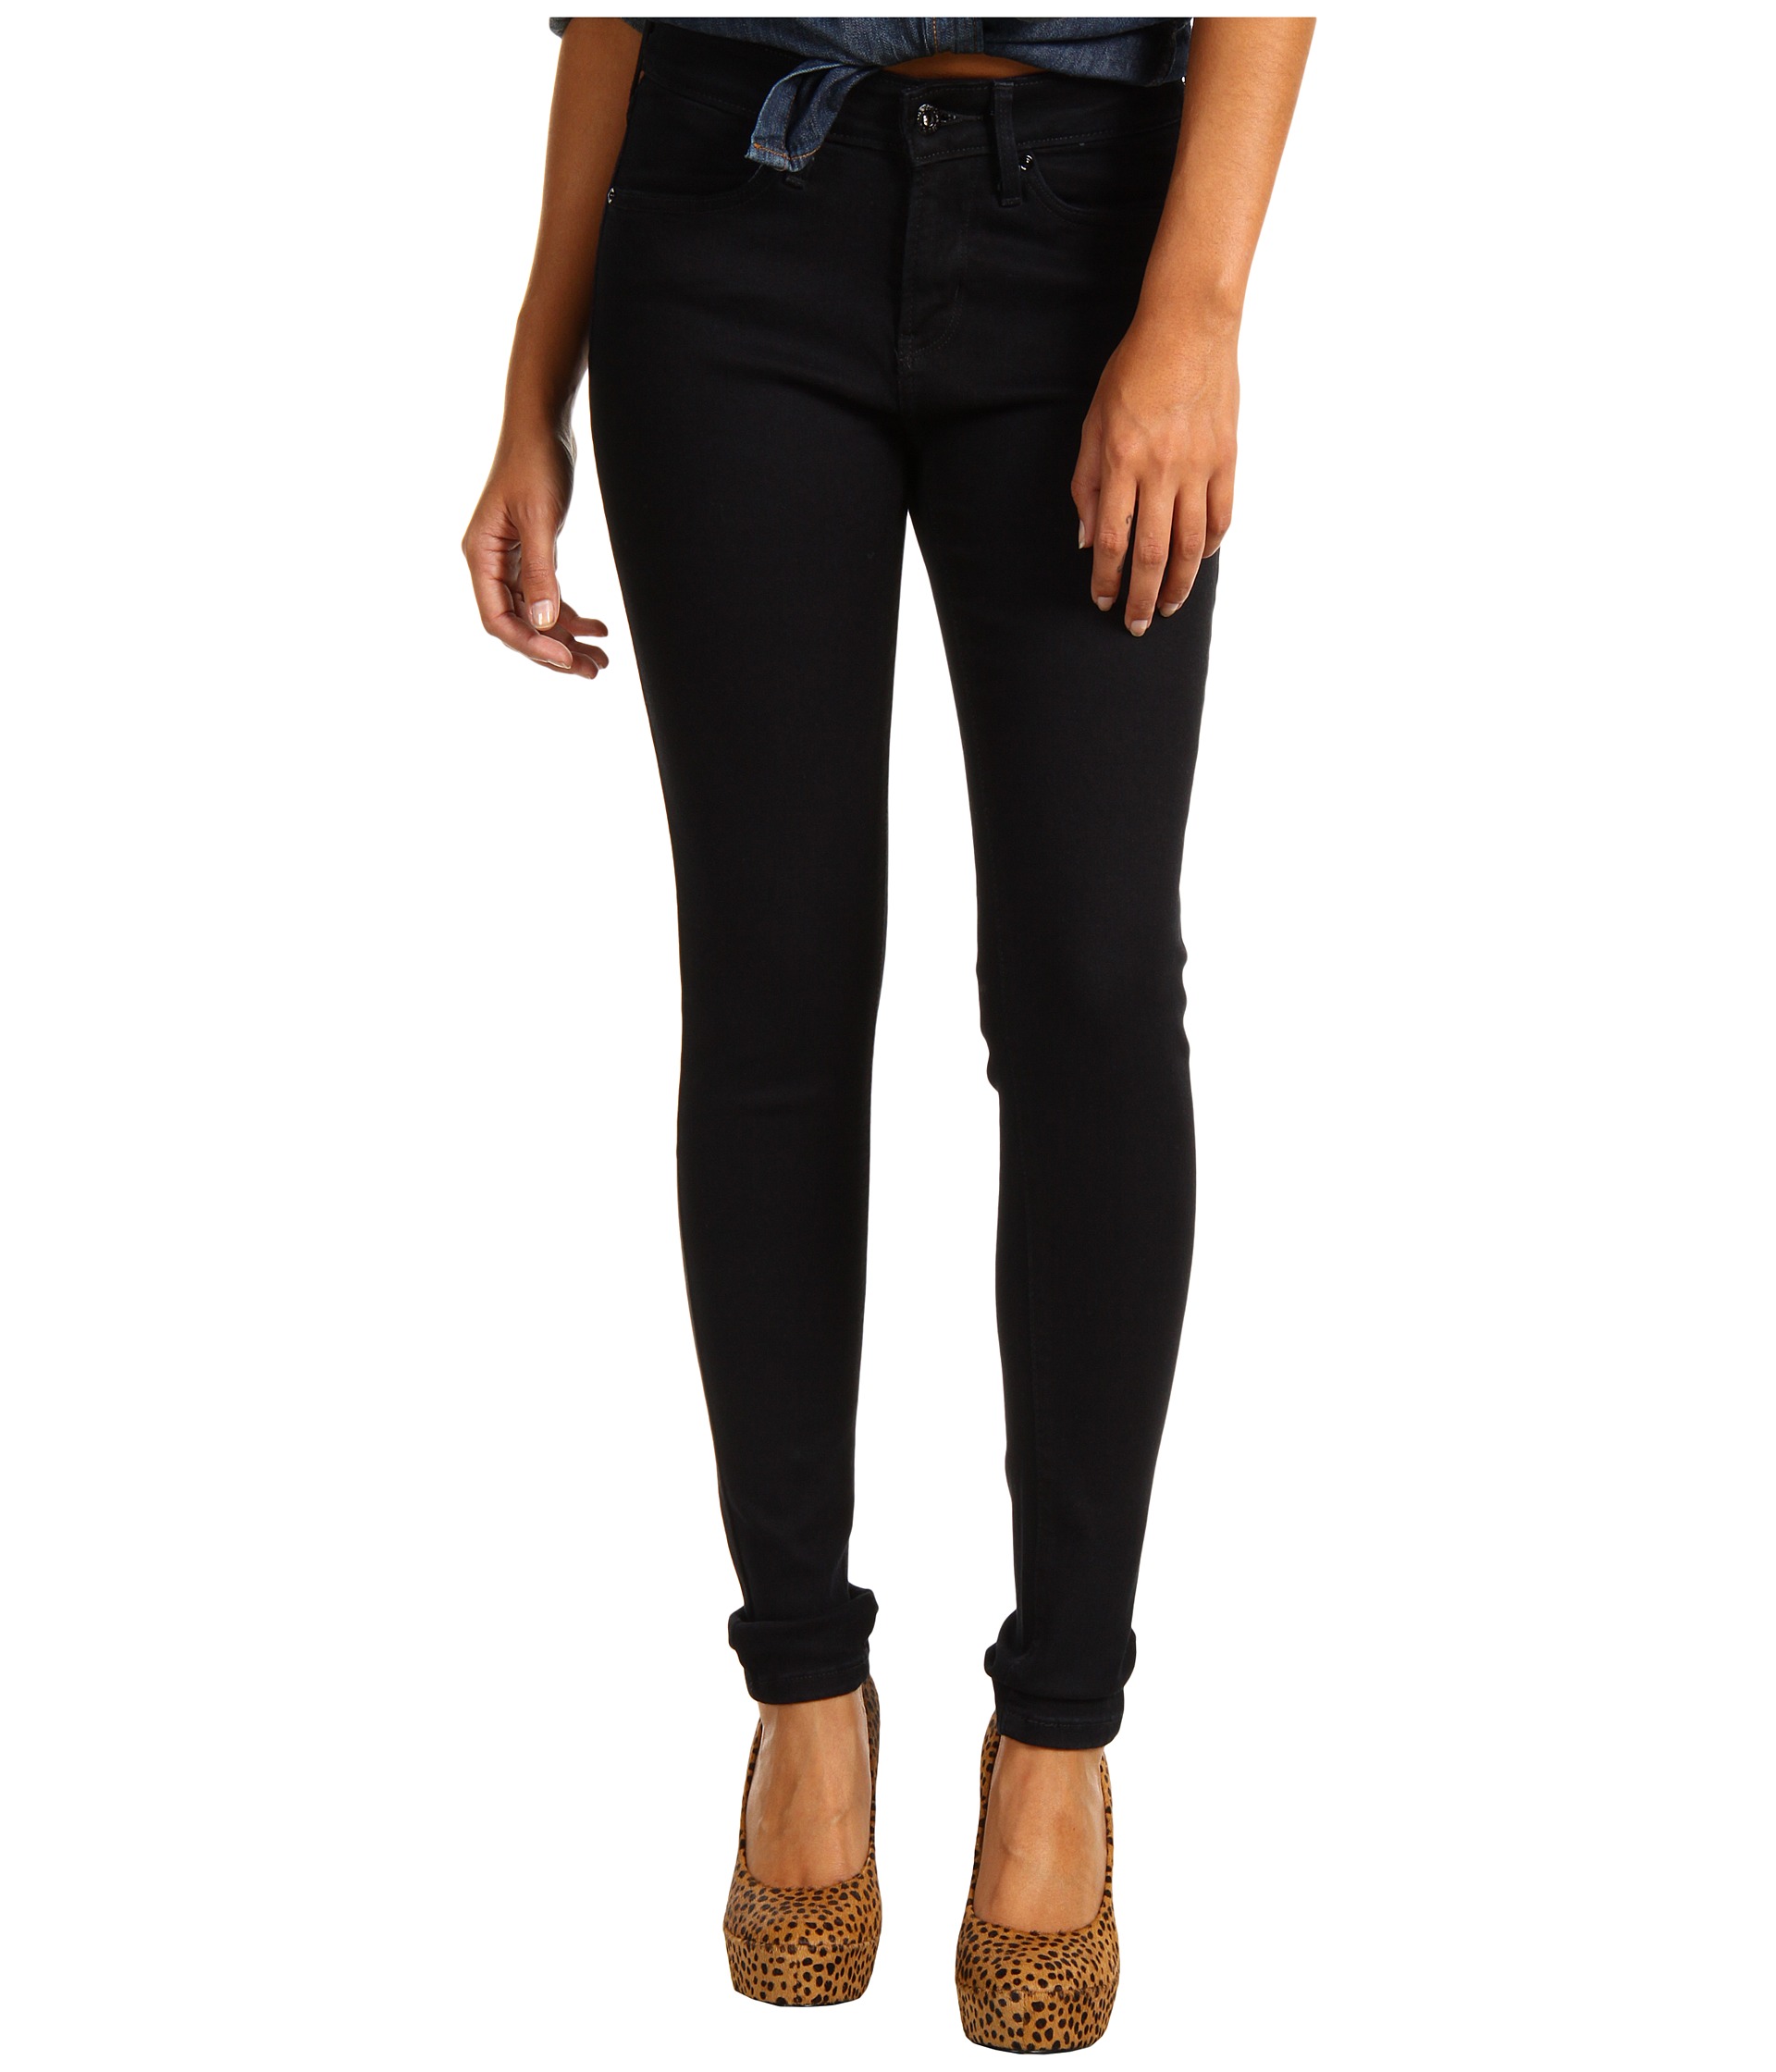 Levis Womens Legging, Clothing, Women | Shipped Free at Zappos